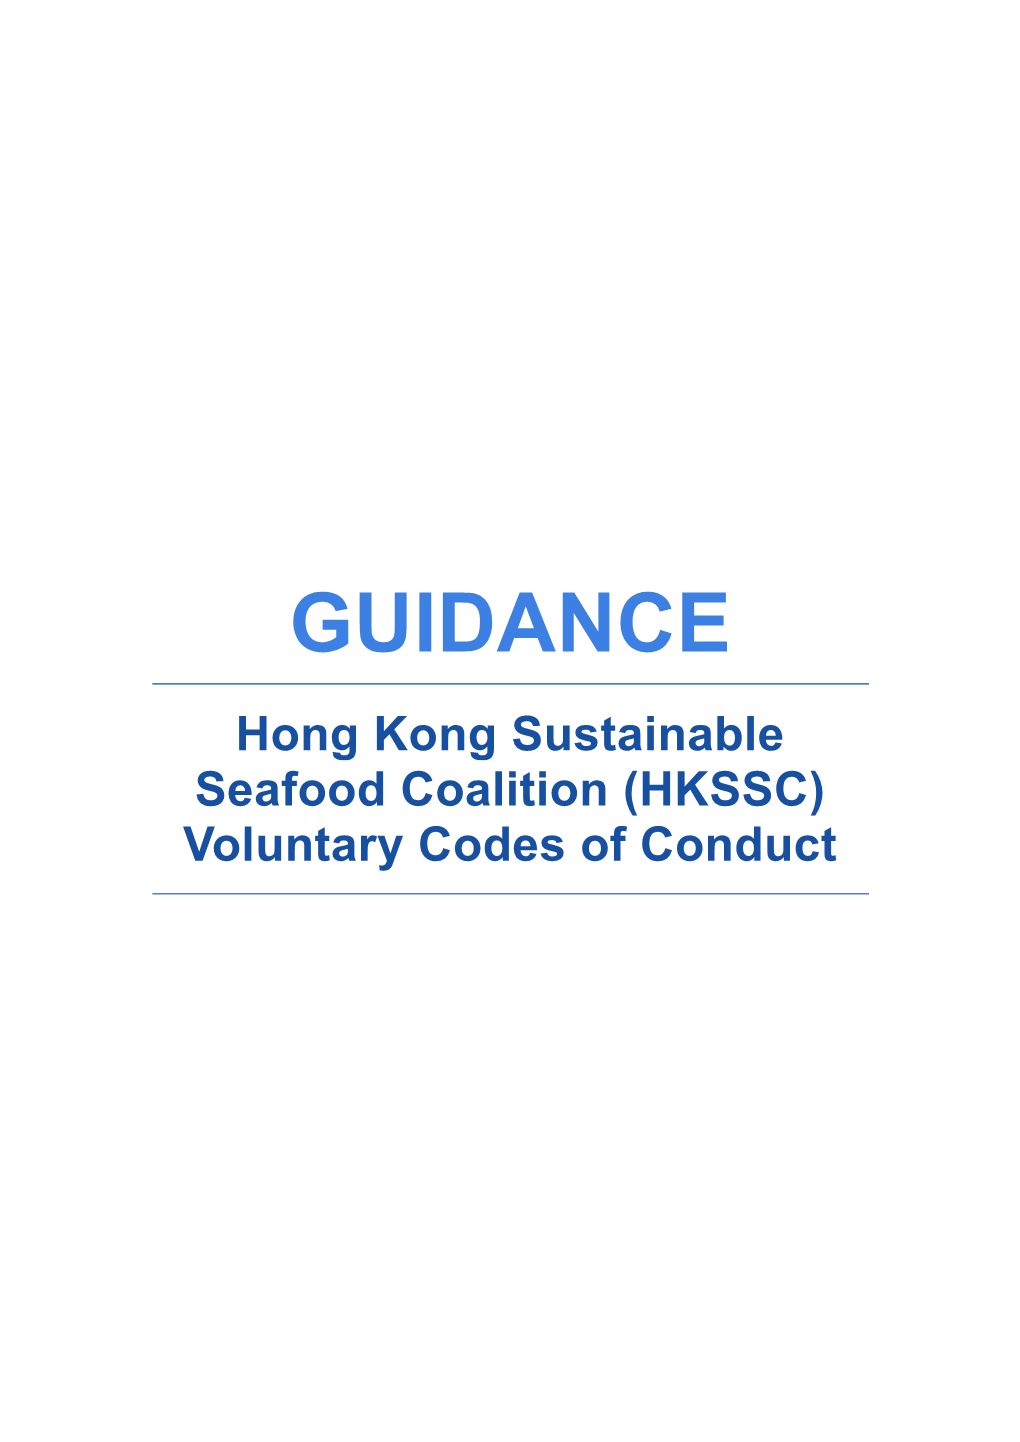 GUIDANCE Hong Kong Sustainable Seafood Coalition (HKSSC) Voluntary Codes of Conduct